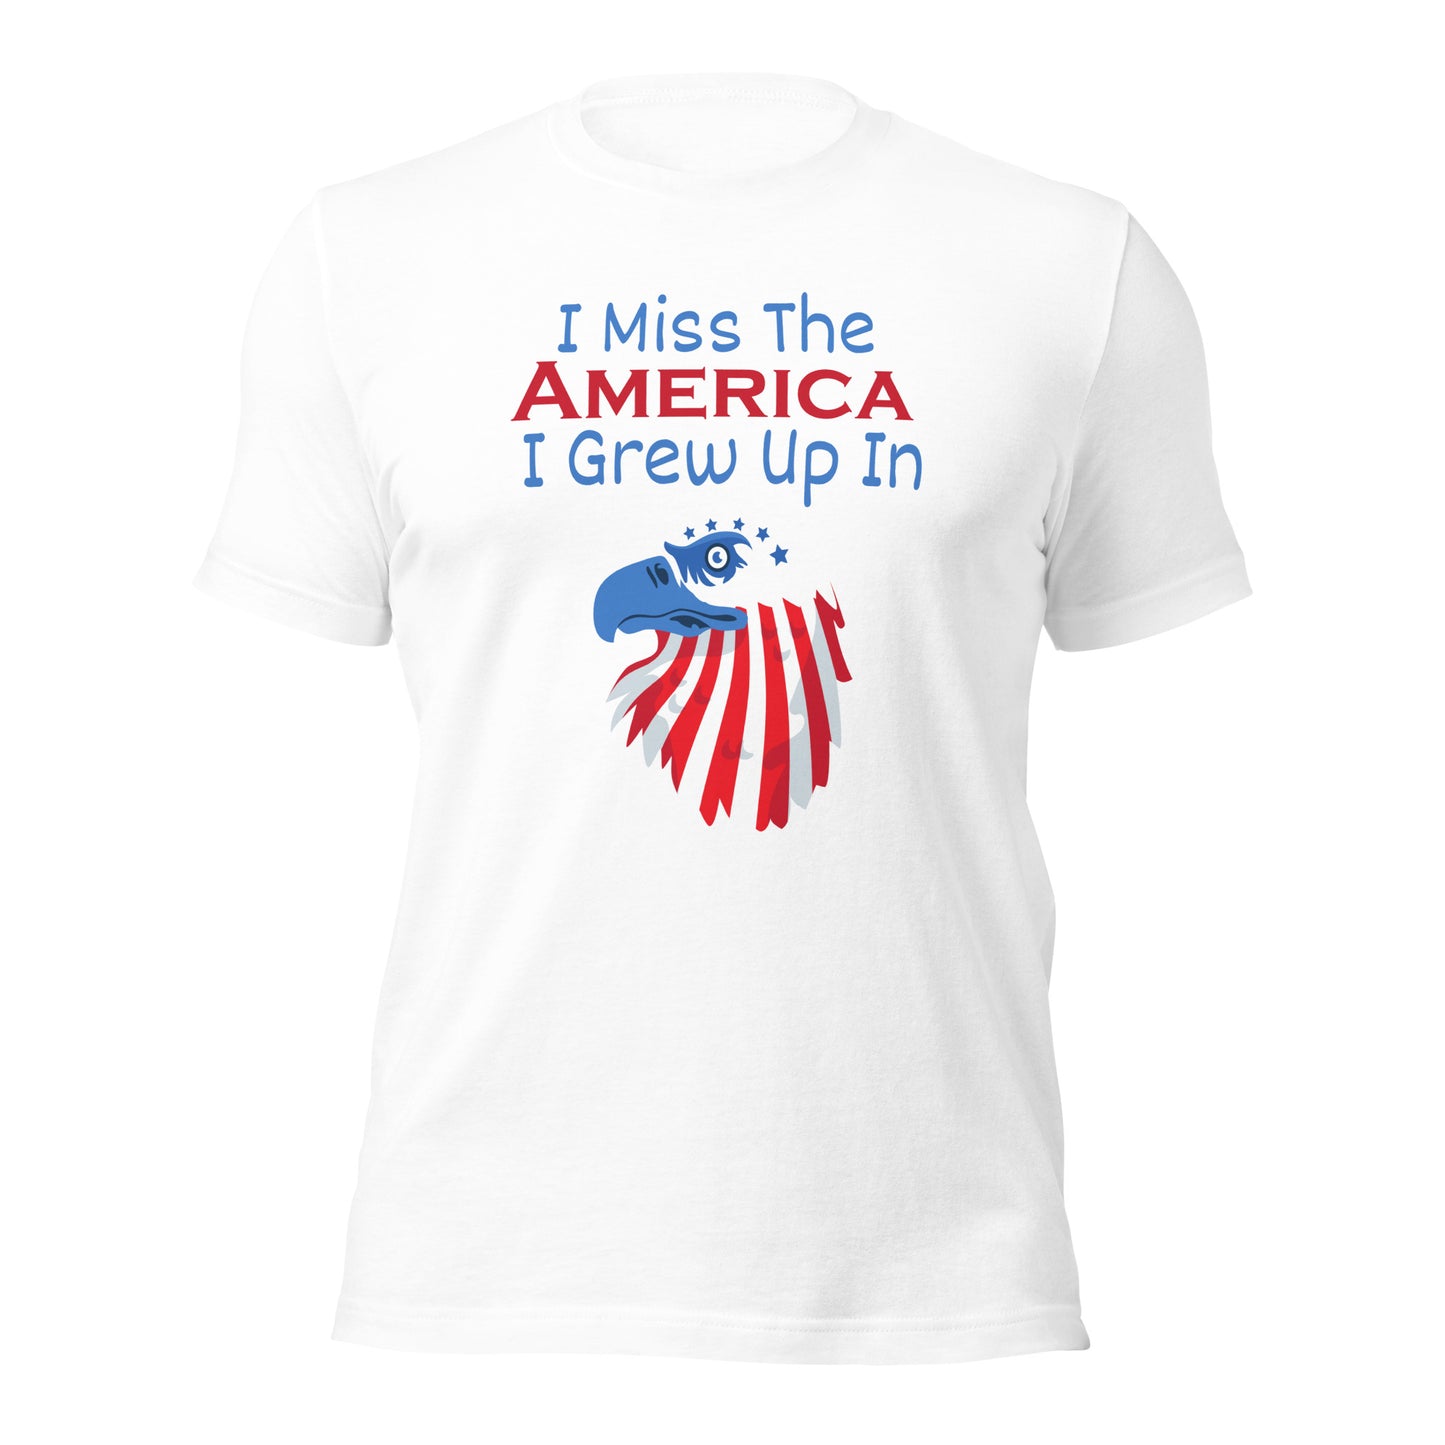 "I Miss The America I Grew Up In" T-Shirt - Weave Got Gifts - Unique Gifts You Won’t Find Anywhere Else!